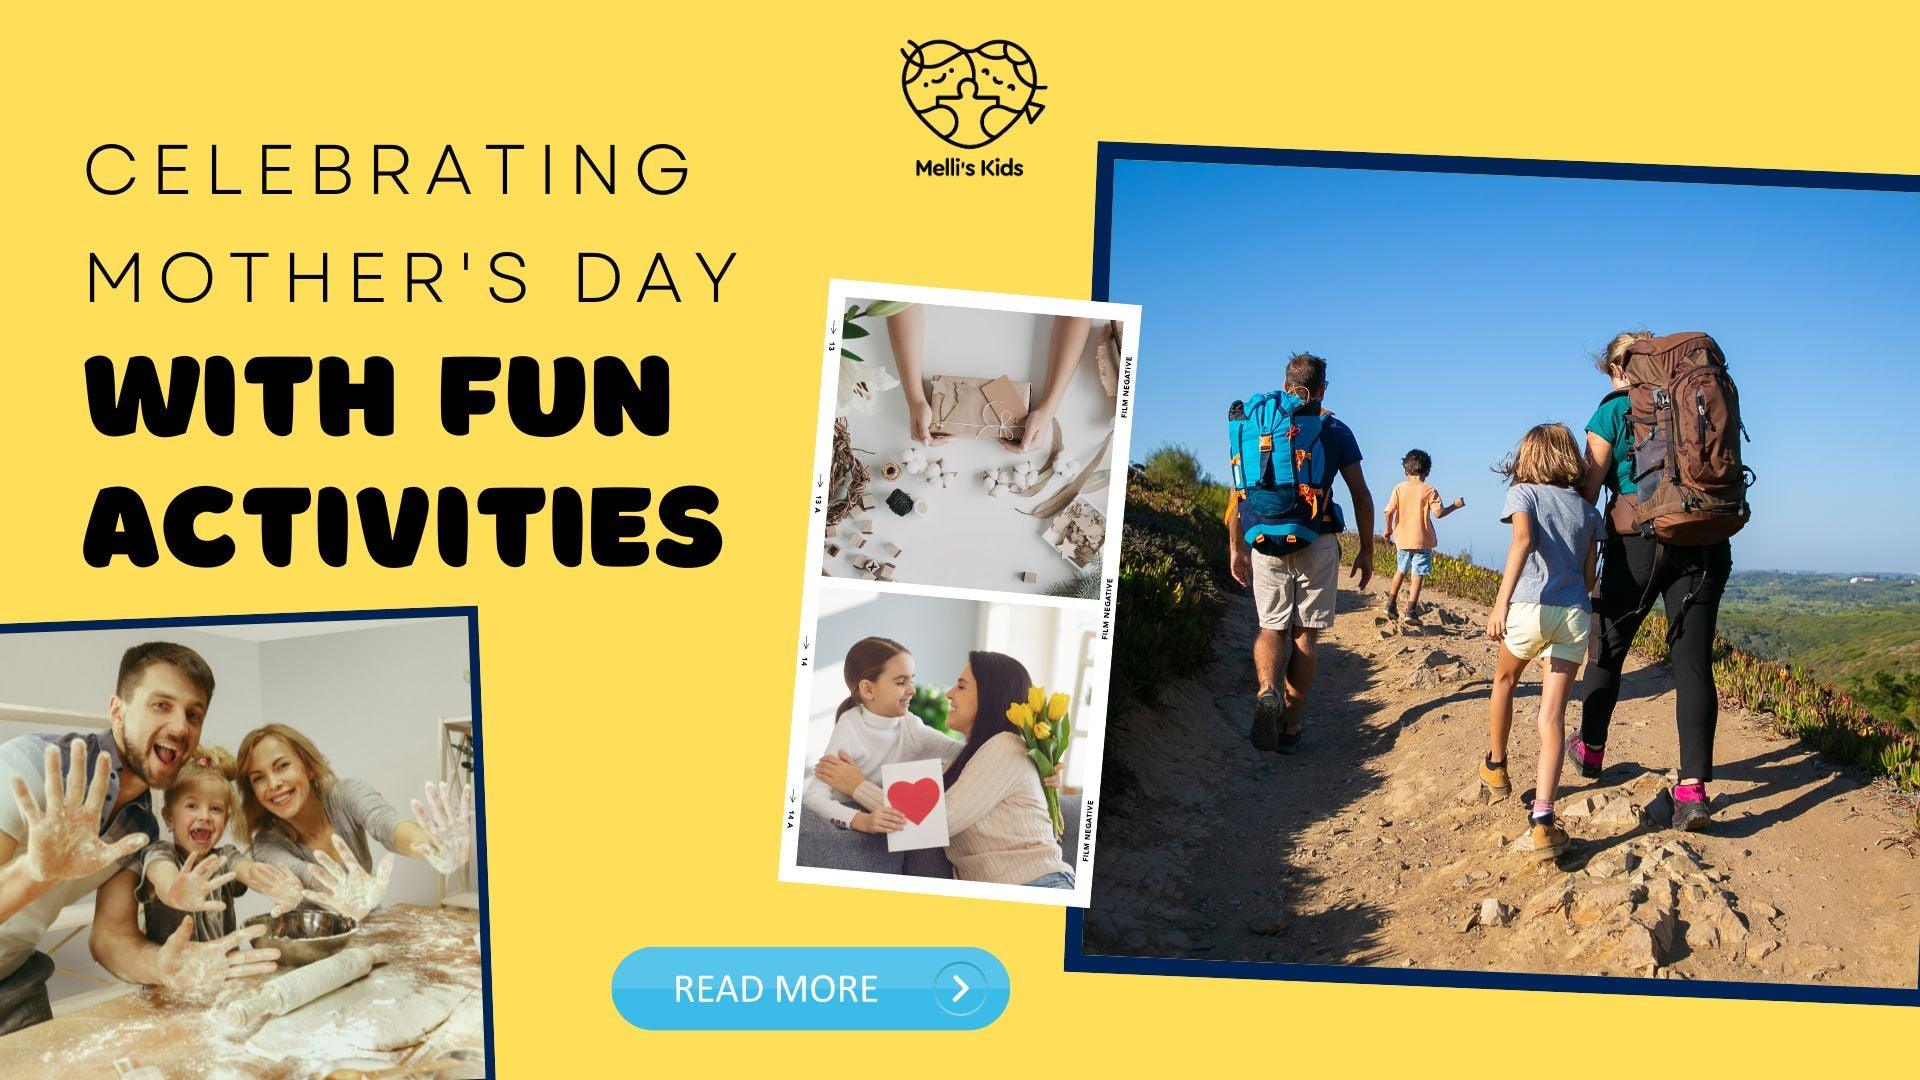 Celebrate Mother's Day in Australia with These Fun Activities - Melli's Kids